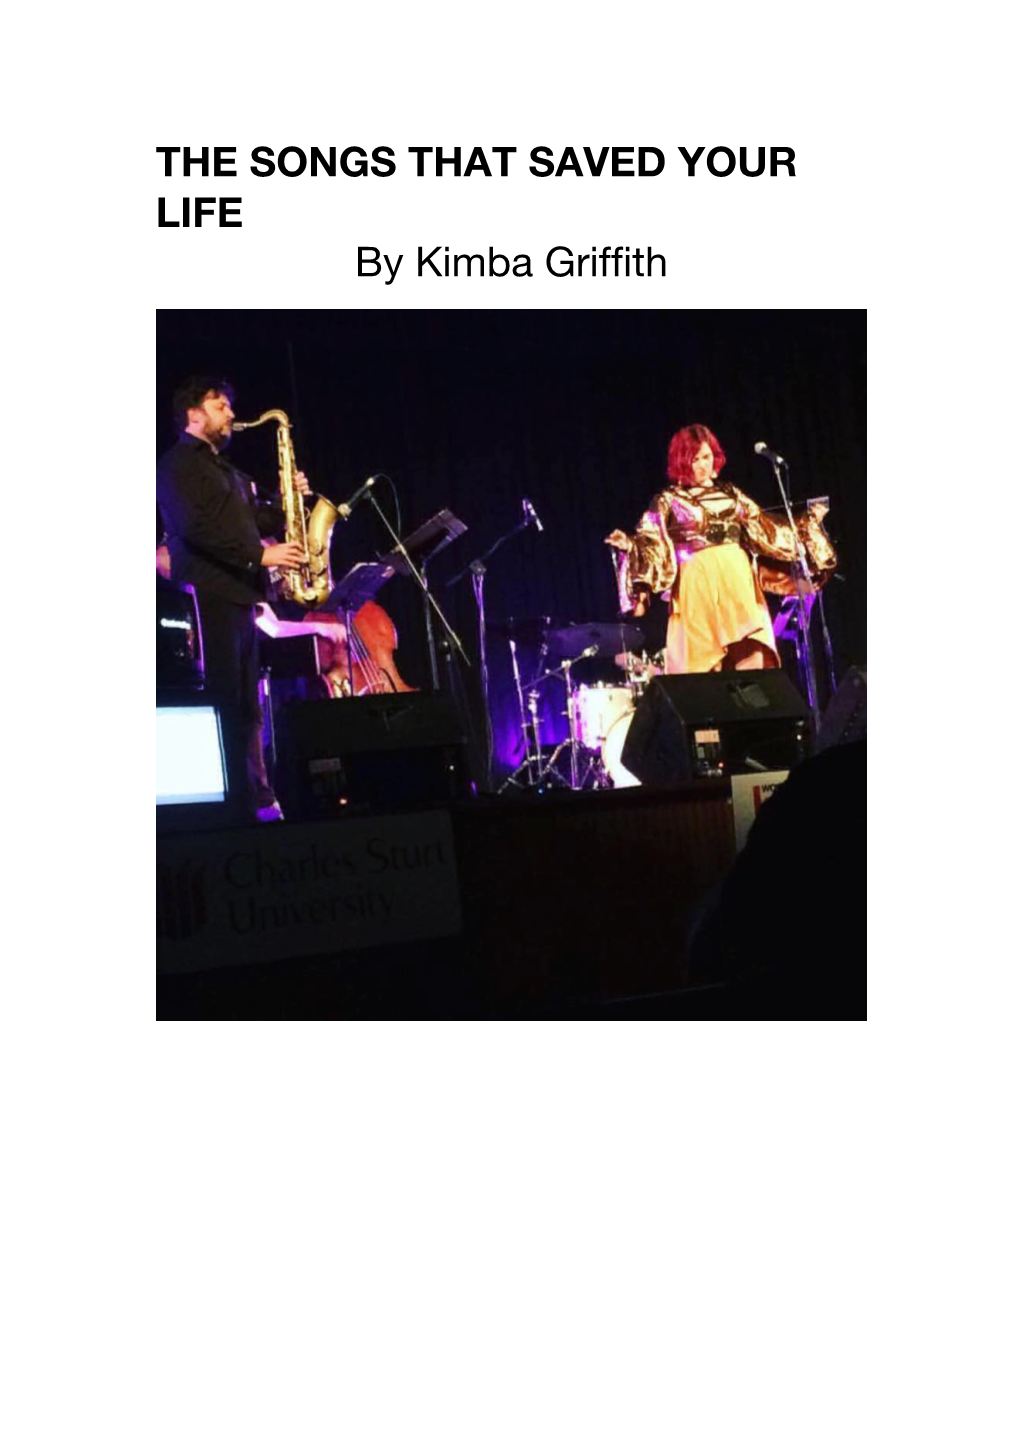 THE SONGS THAT SAVED YOUR LIFE by Kimba Griffith